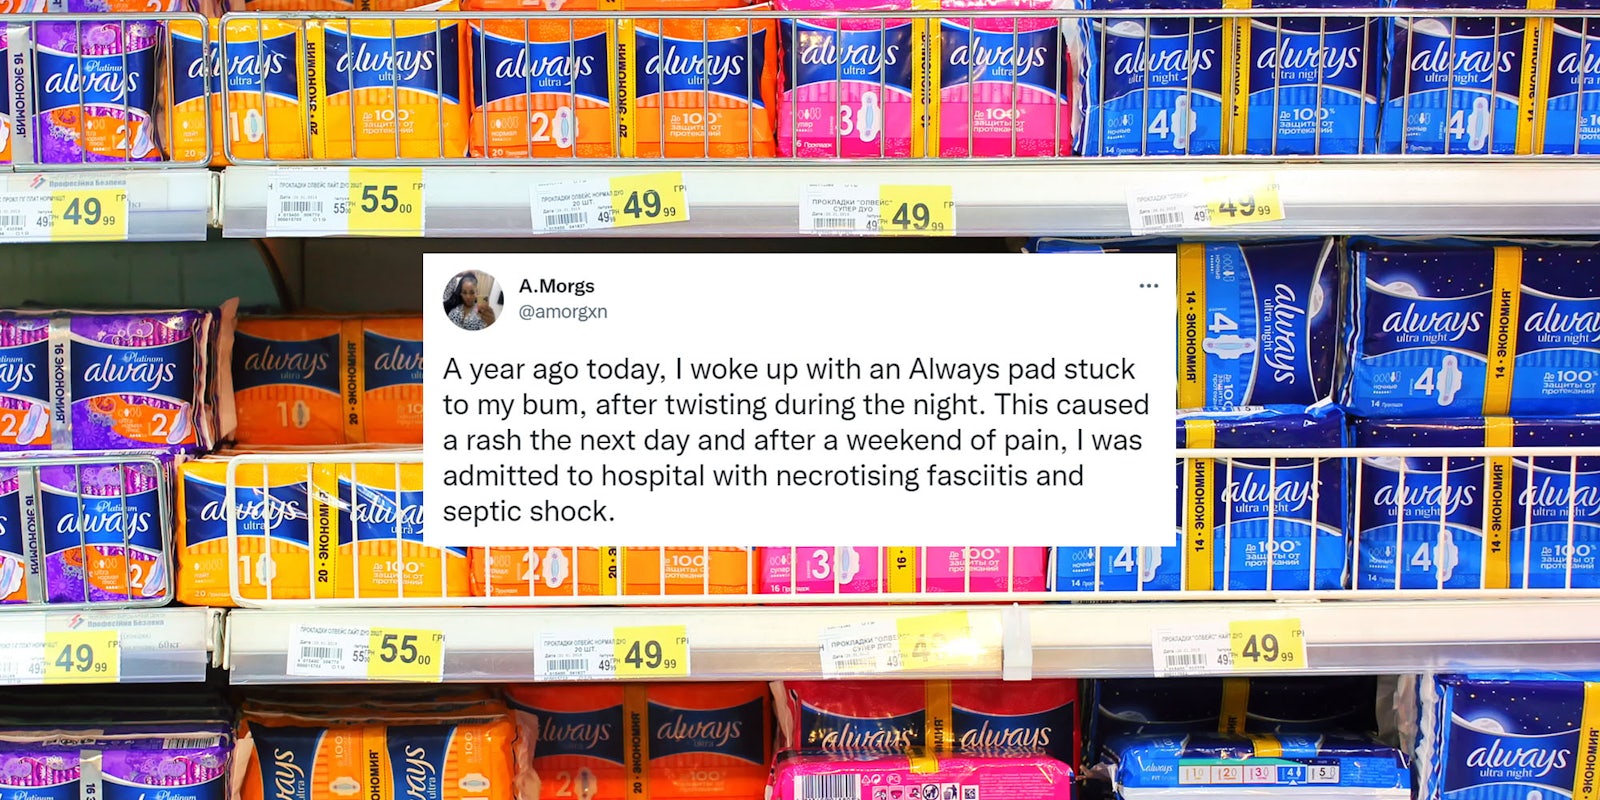 Always pads in aisle with tweet centered by A.Morgs 'A year ago today, I woke up with an Always pad stuck to my bum, after twisting during the night. This caused a rash the next day and after a weekend of pain, I was admitted to hospital with necrotising fasciitis and septic shock.'